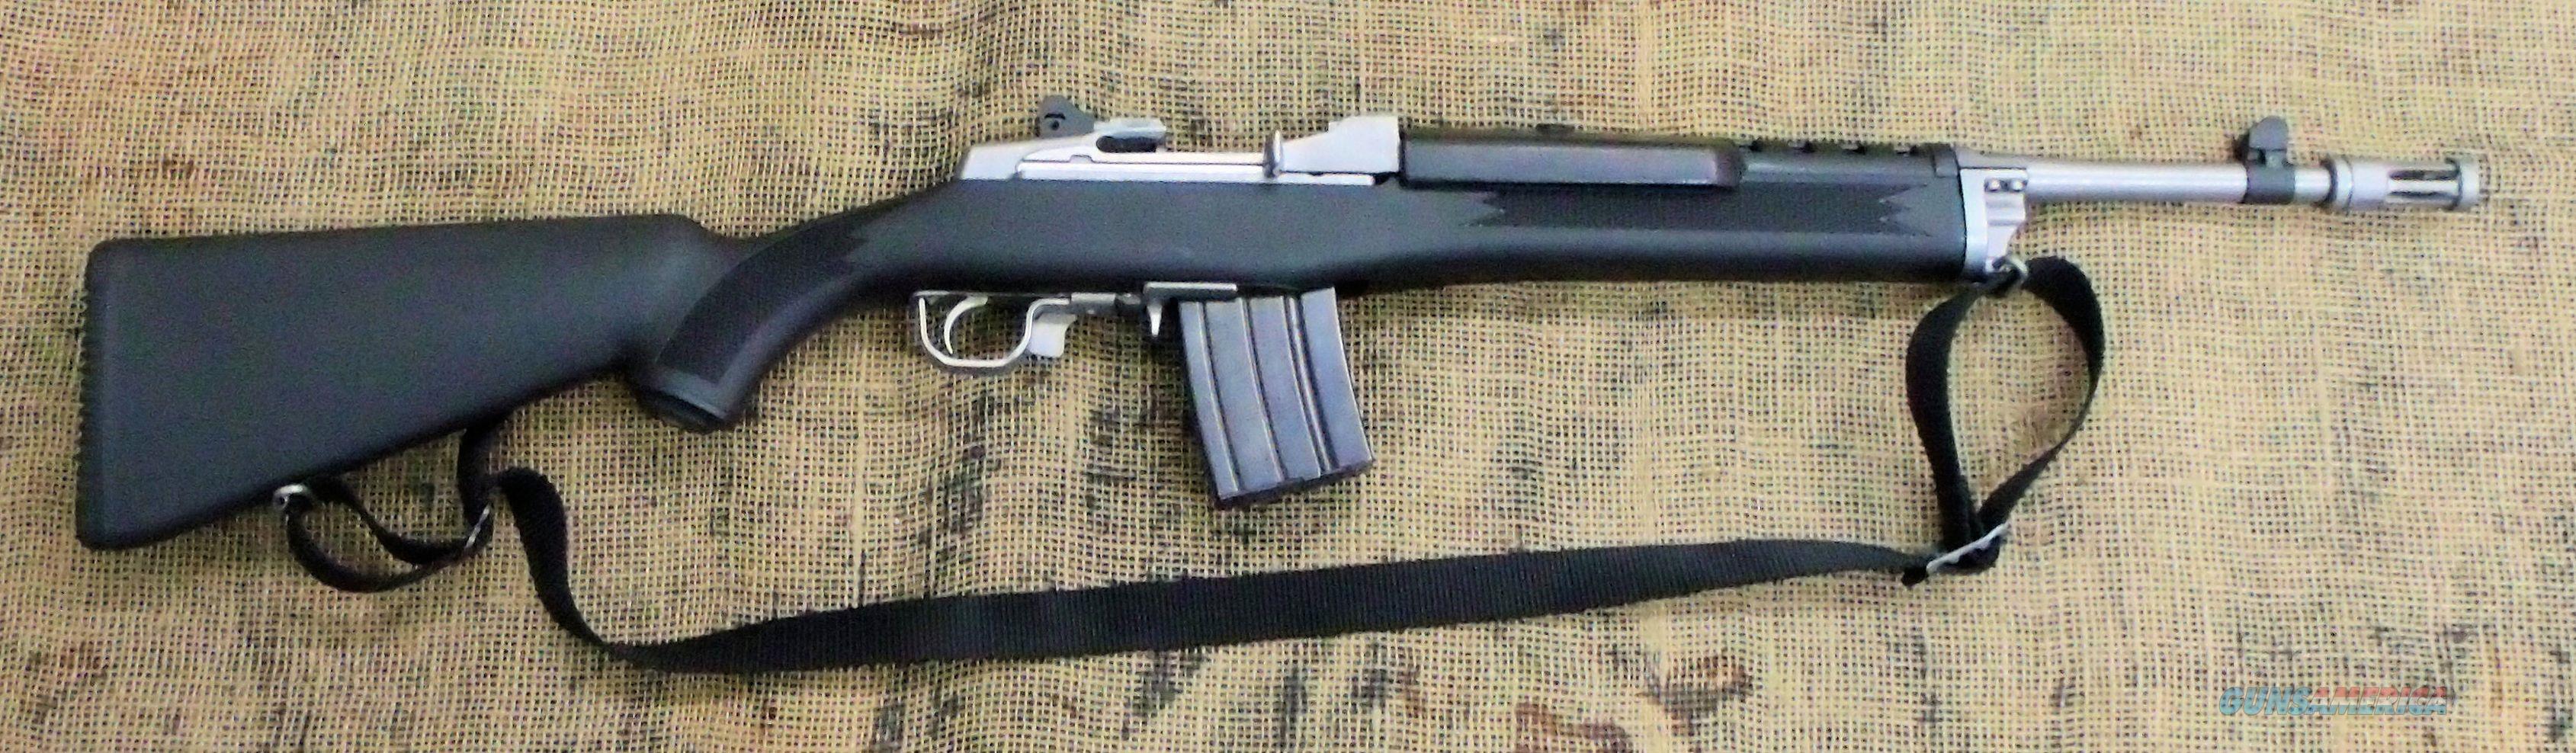 RUGER Mini-14 Ranch Tactical Rifle, 5.56/223 Cal. 